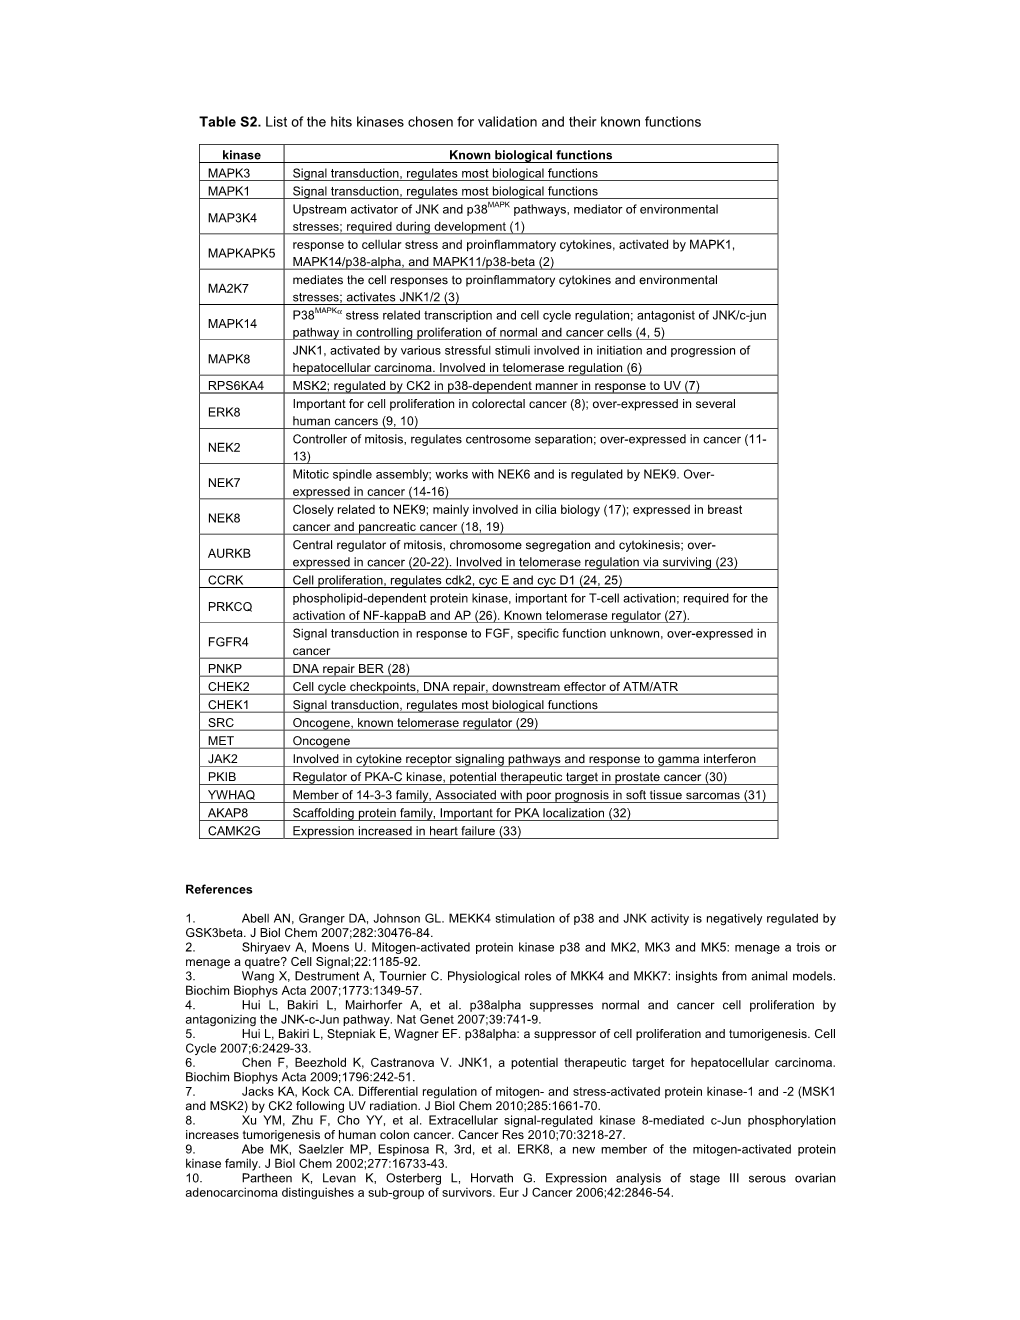 Table S2. List of the Hits Kinases Chosen for Validation and Their Known Functions